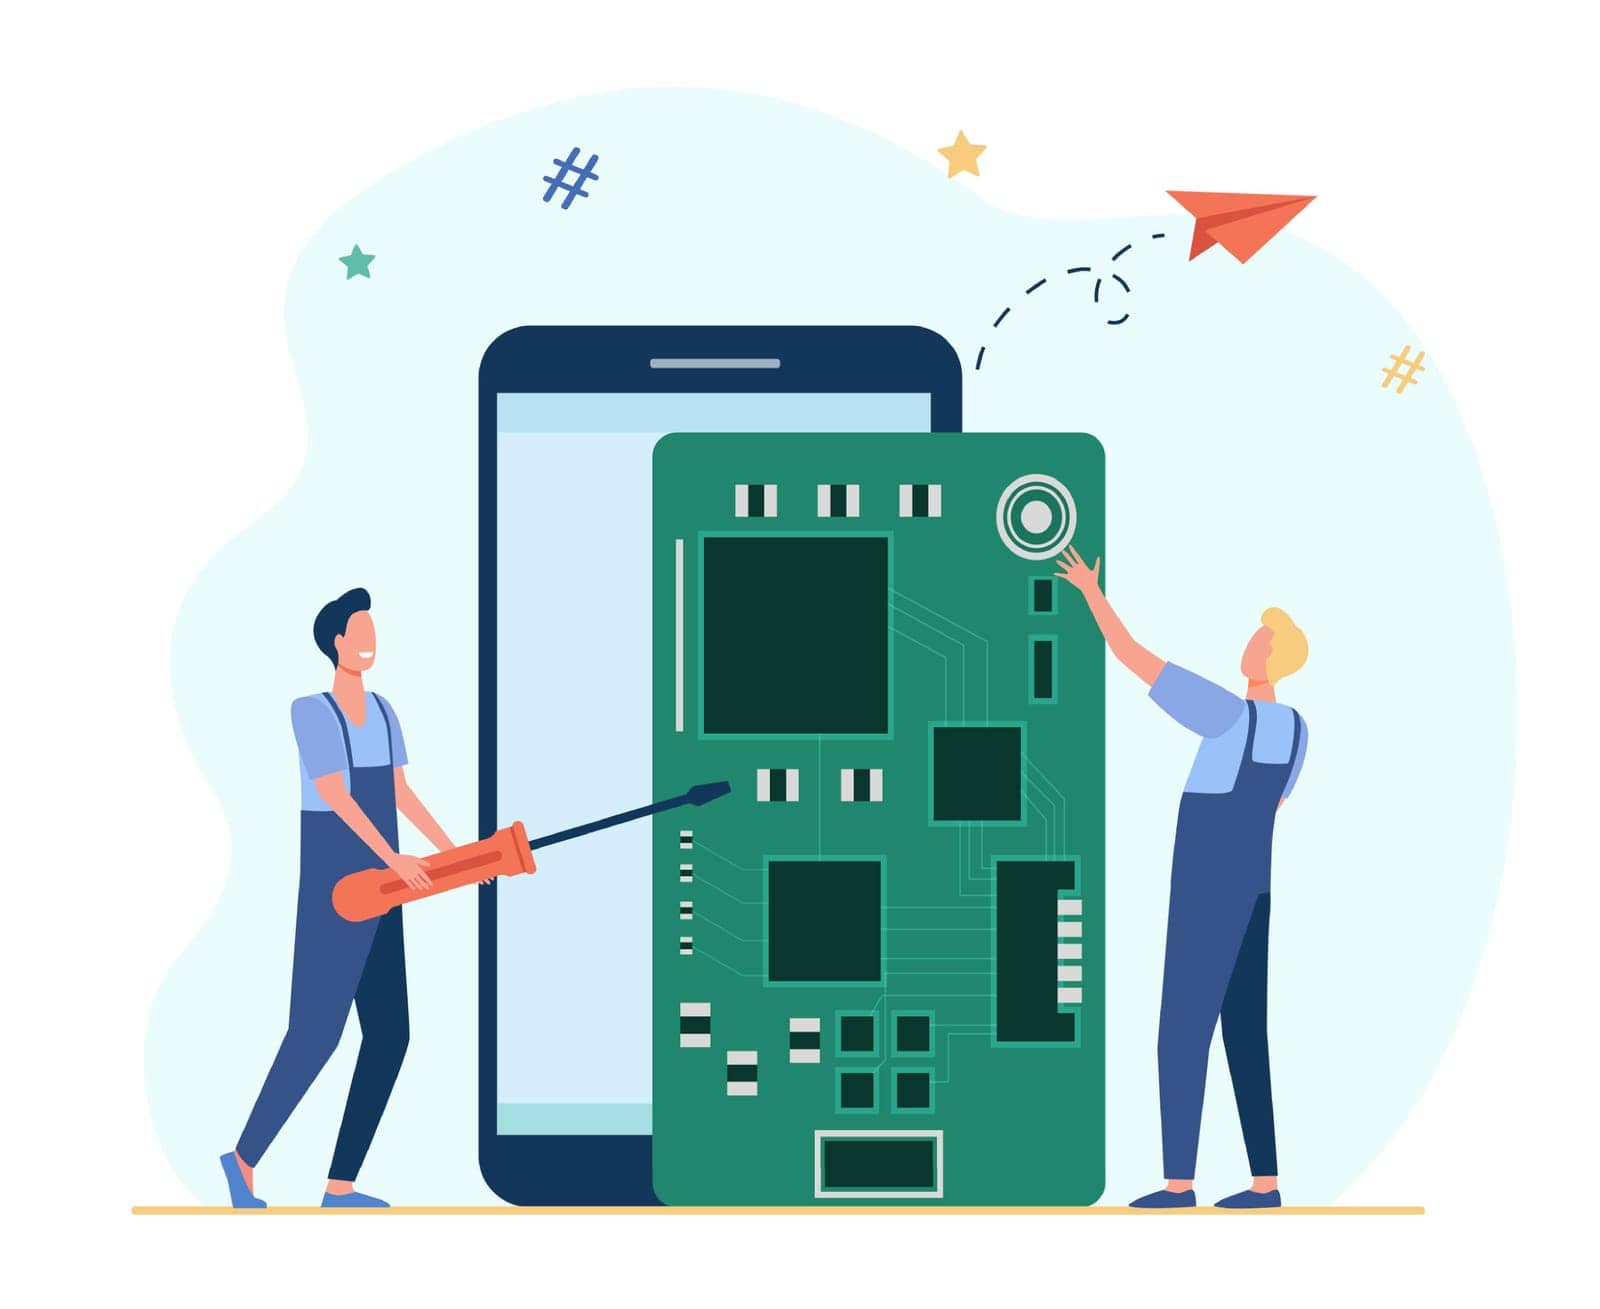 Tiny technicians repairing smartphone. Screwdriver, phone, board flat vector illustration. Digital technology and repair service concept for banner, website design or landing web page